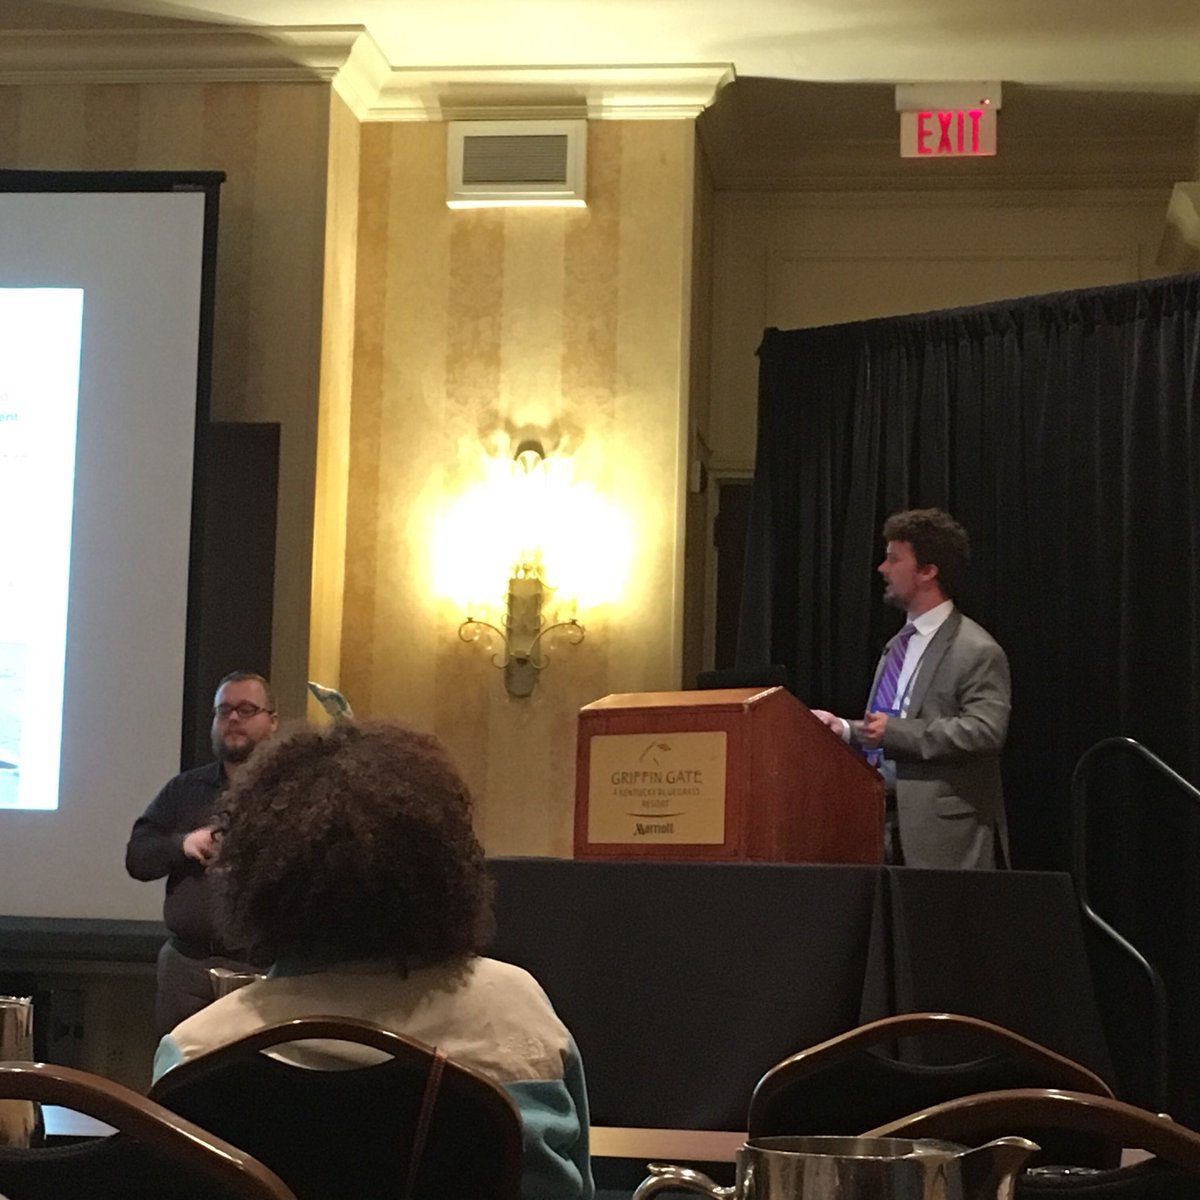 Check out our members presenting at the Kentucky Water Resources Annual Symposium!! @UKWater